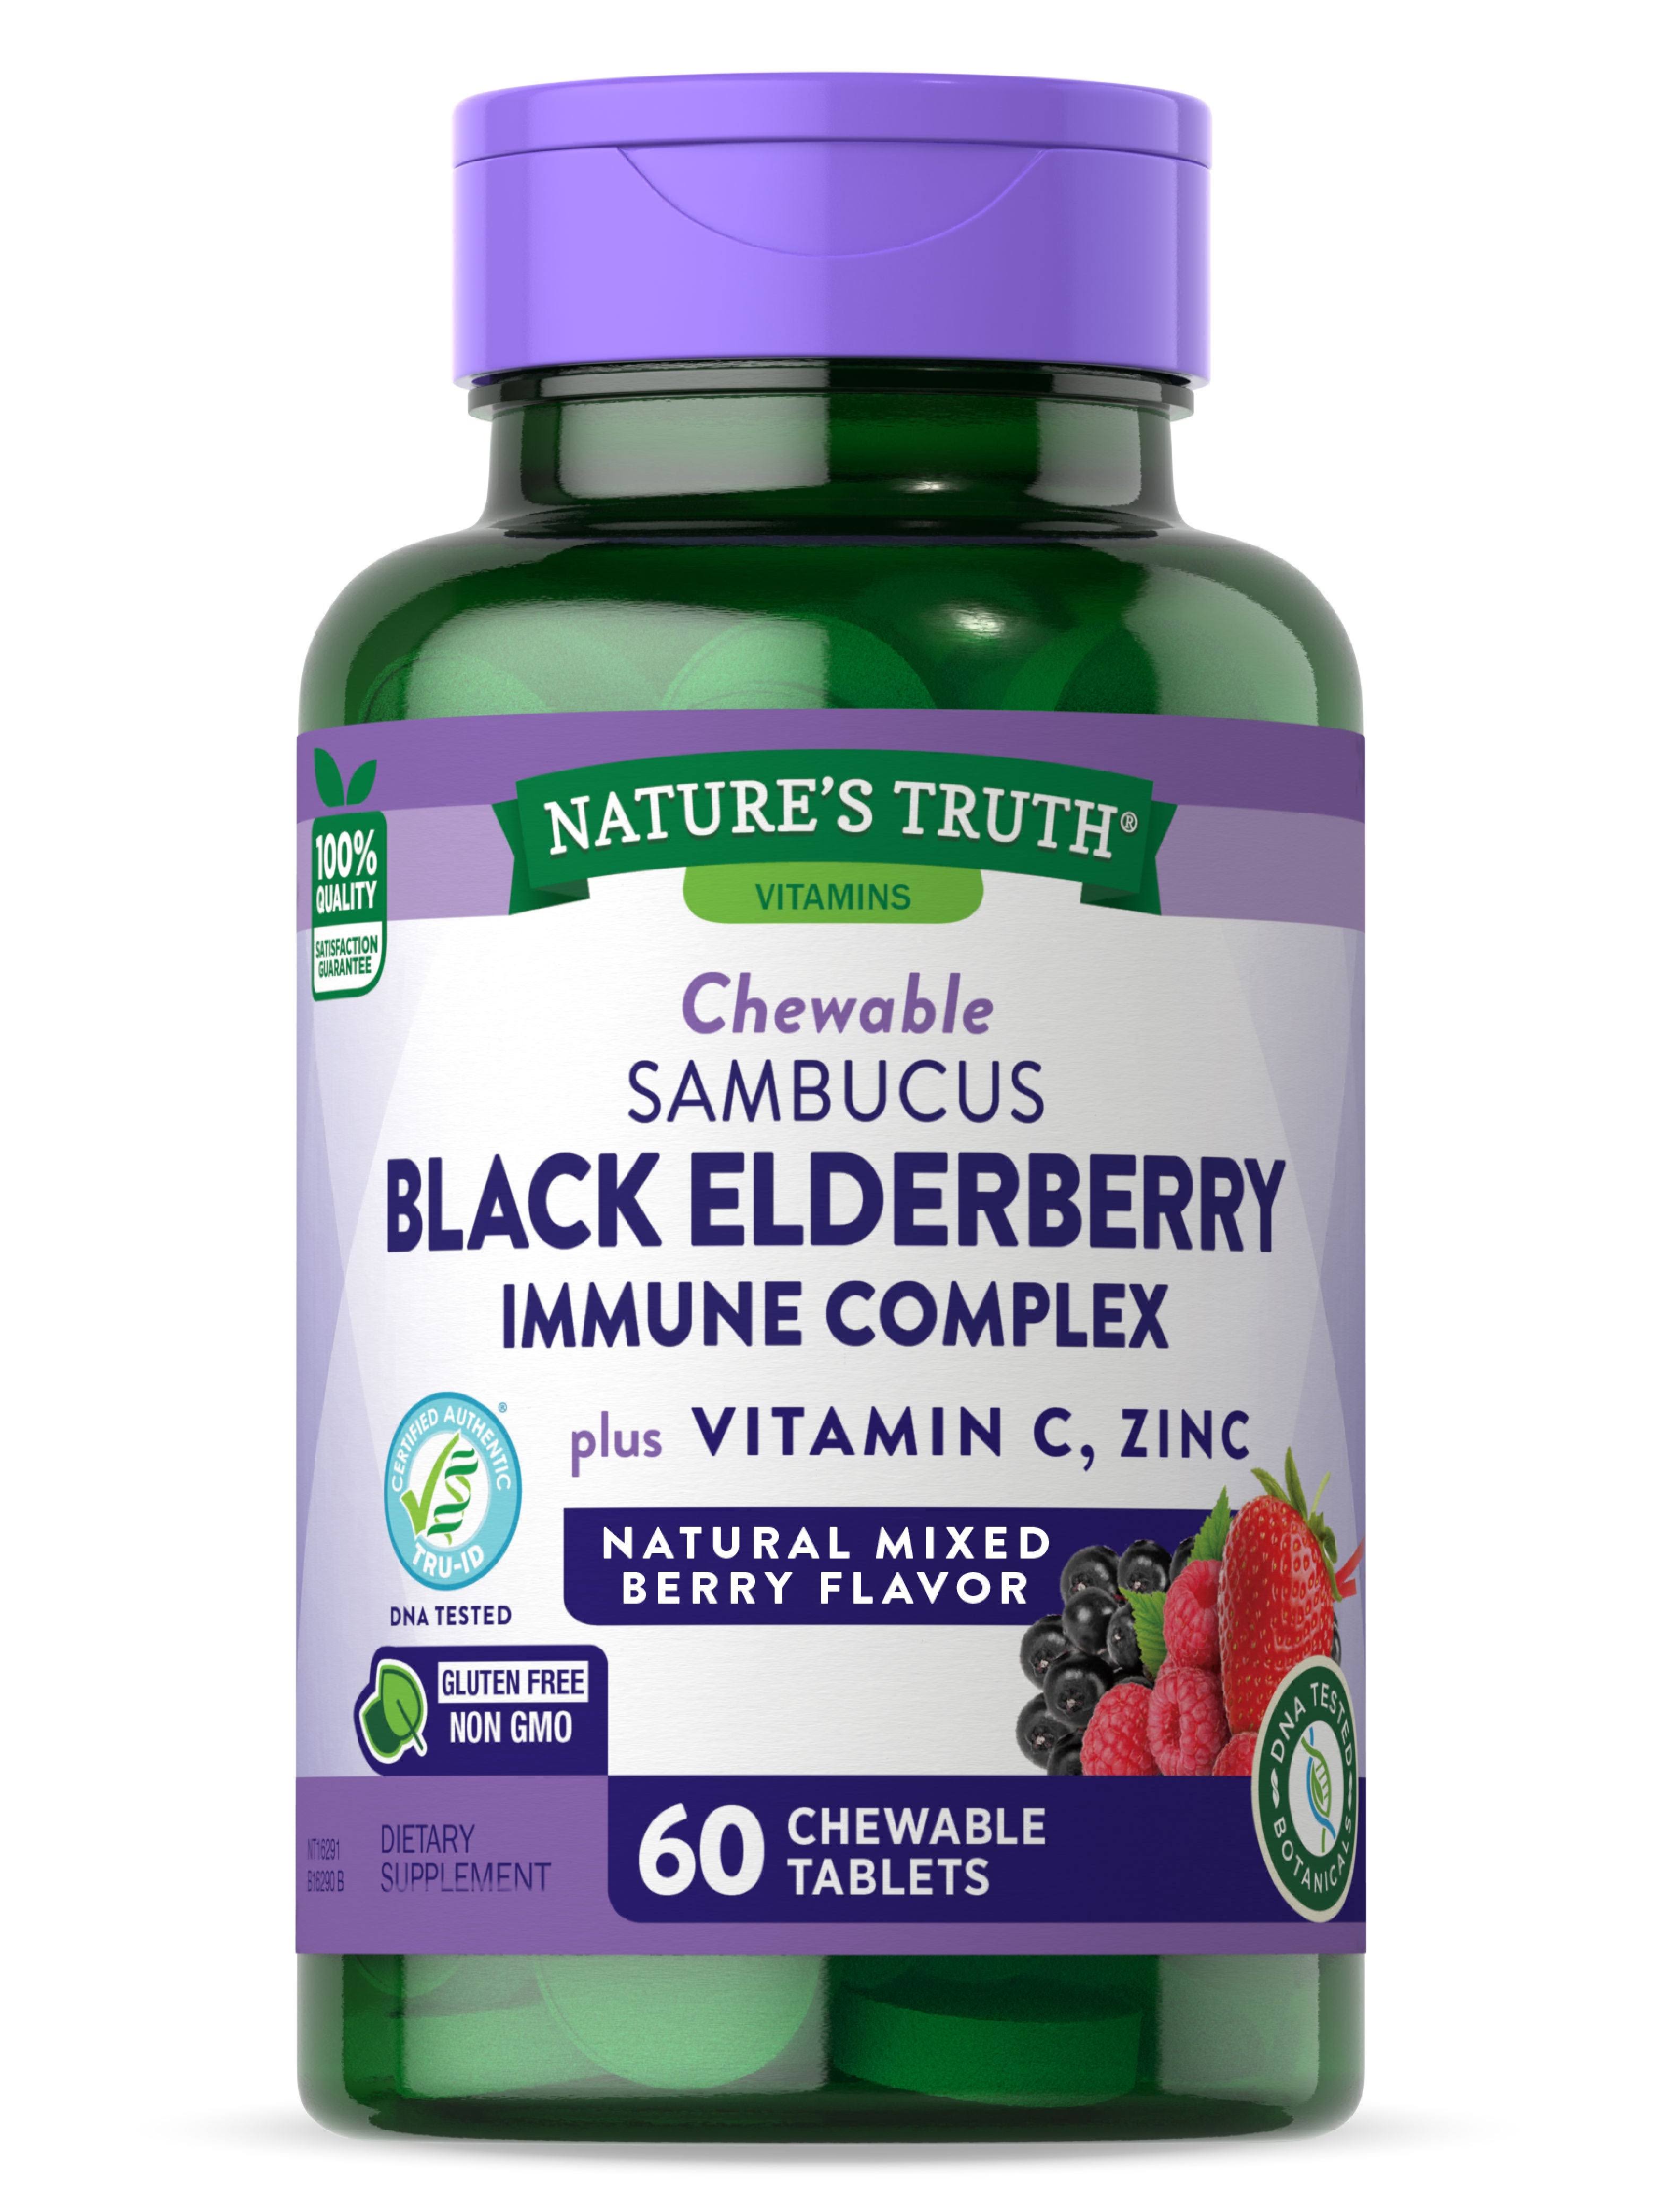 Nature's Truth Sambucus Black Elderberry, Chewables, Naturally Mixed Berry Flavor - 60 chewable tablets